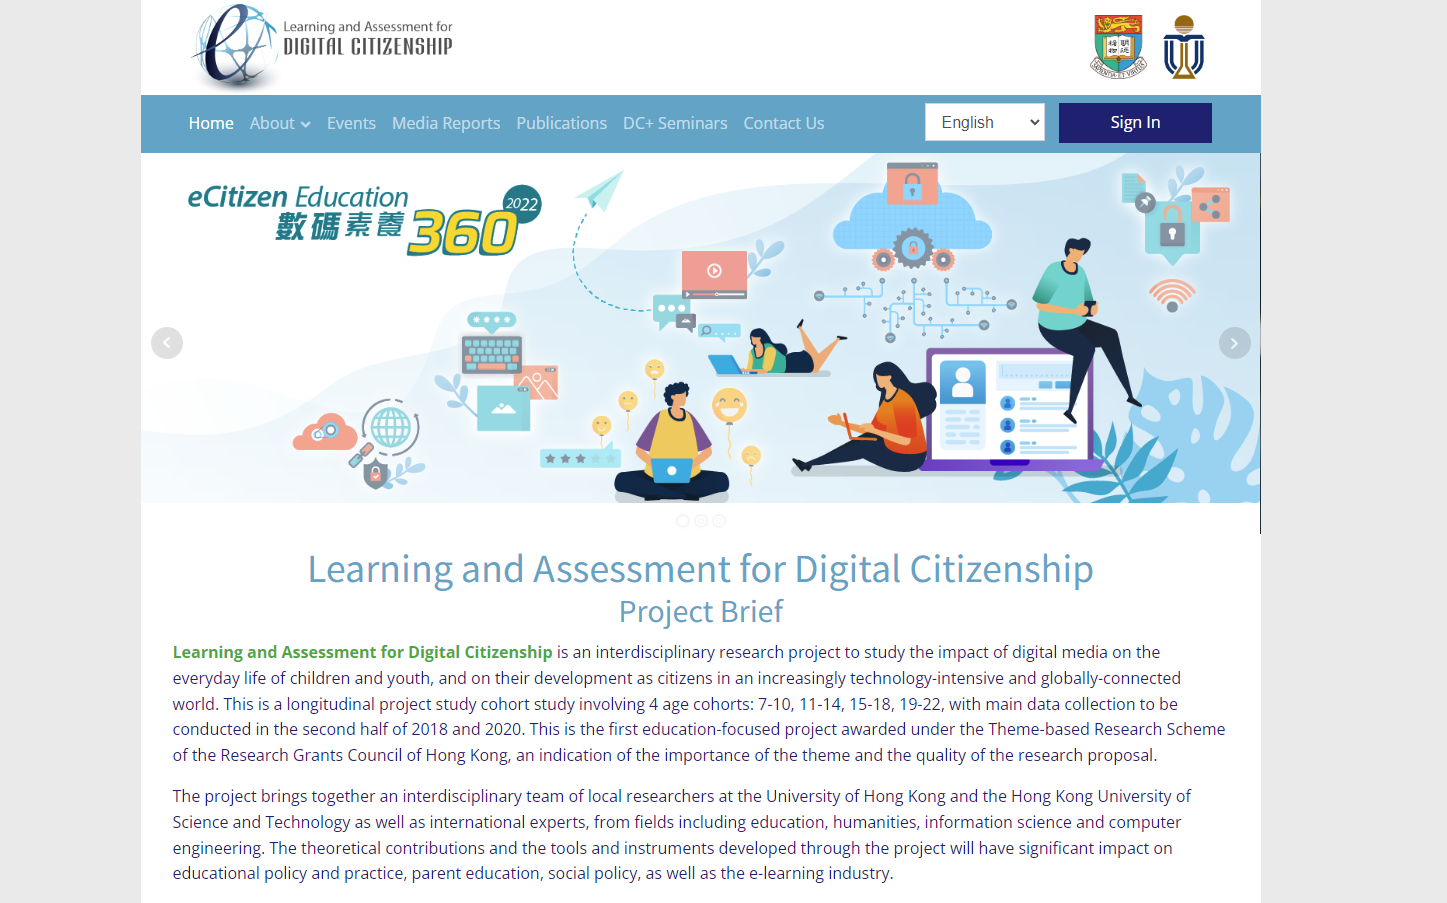 Learning and Assessment for Digital Citizenship